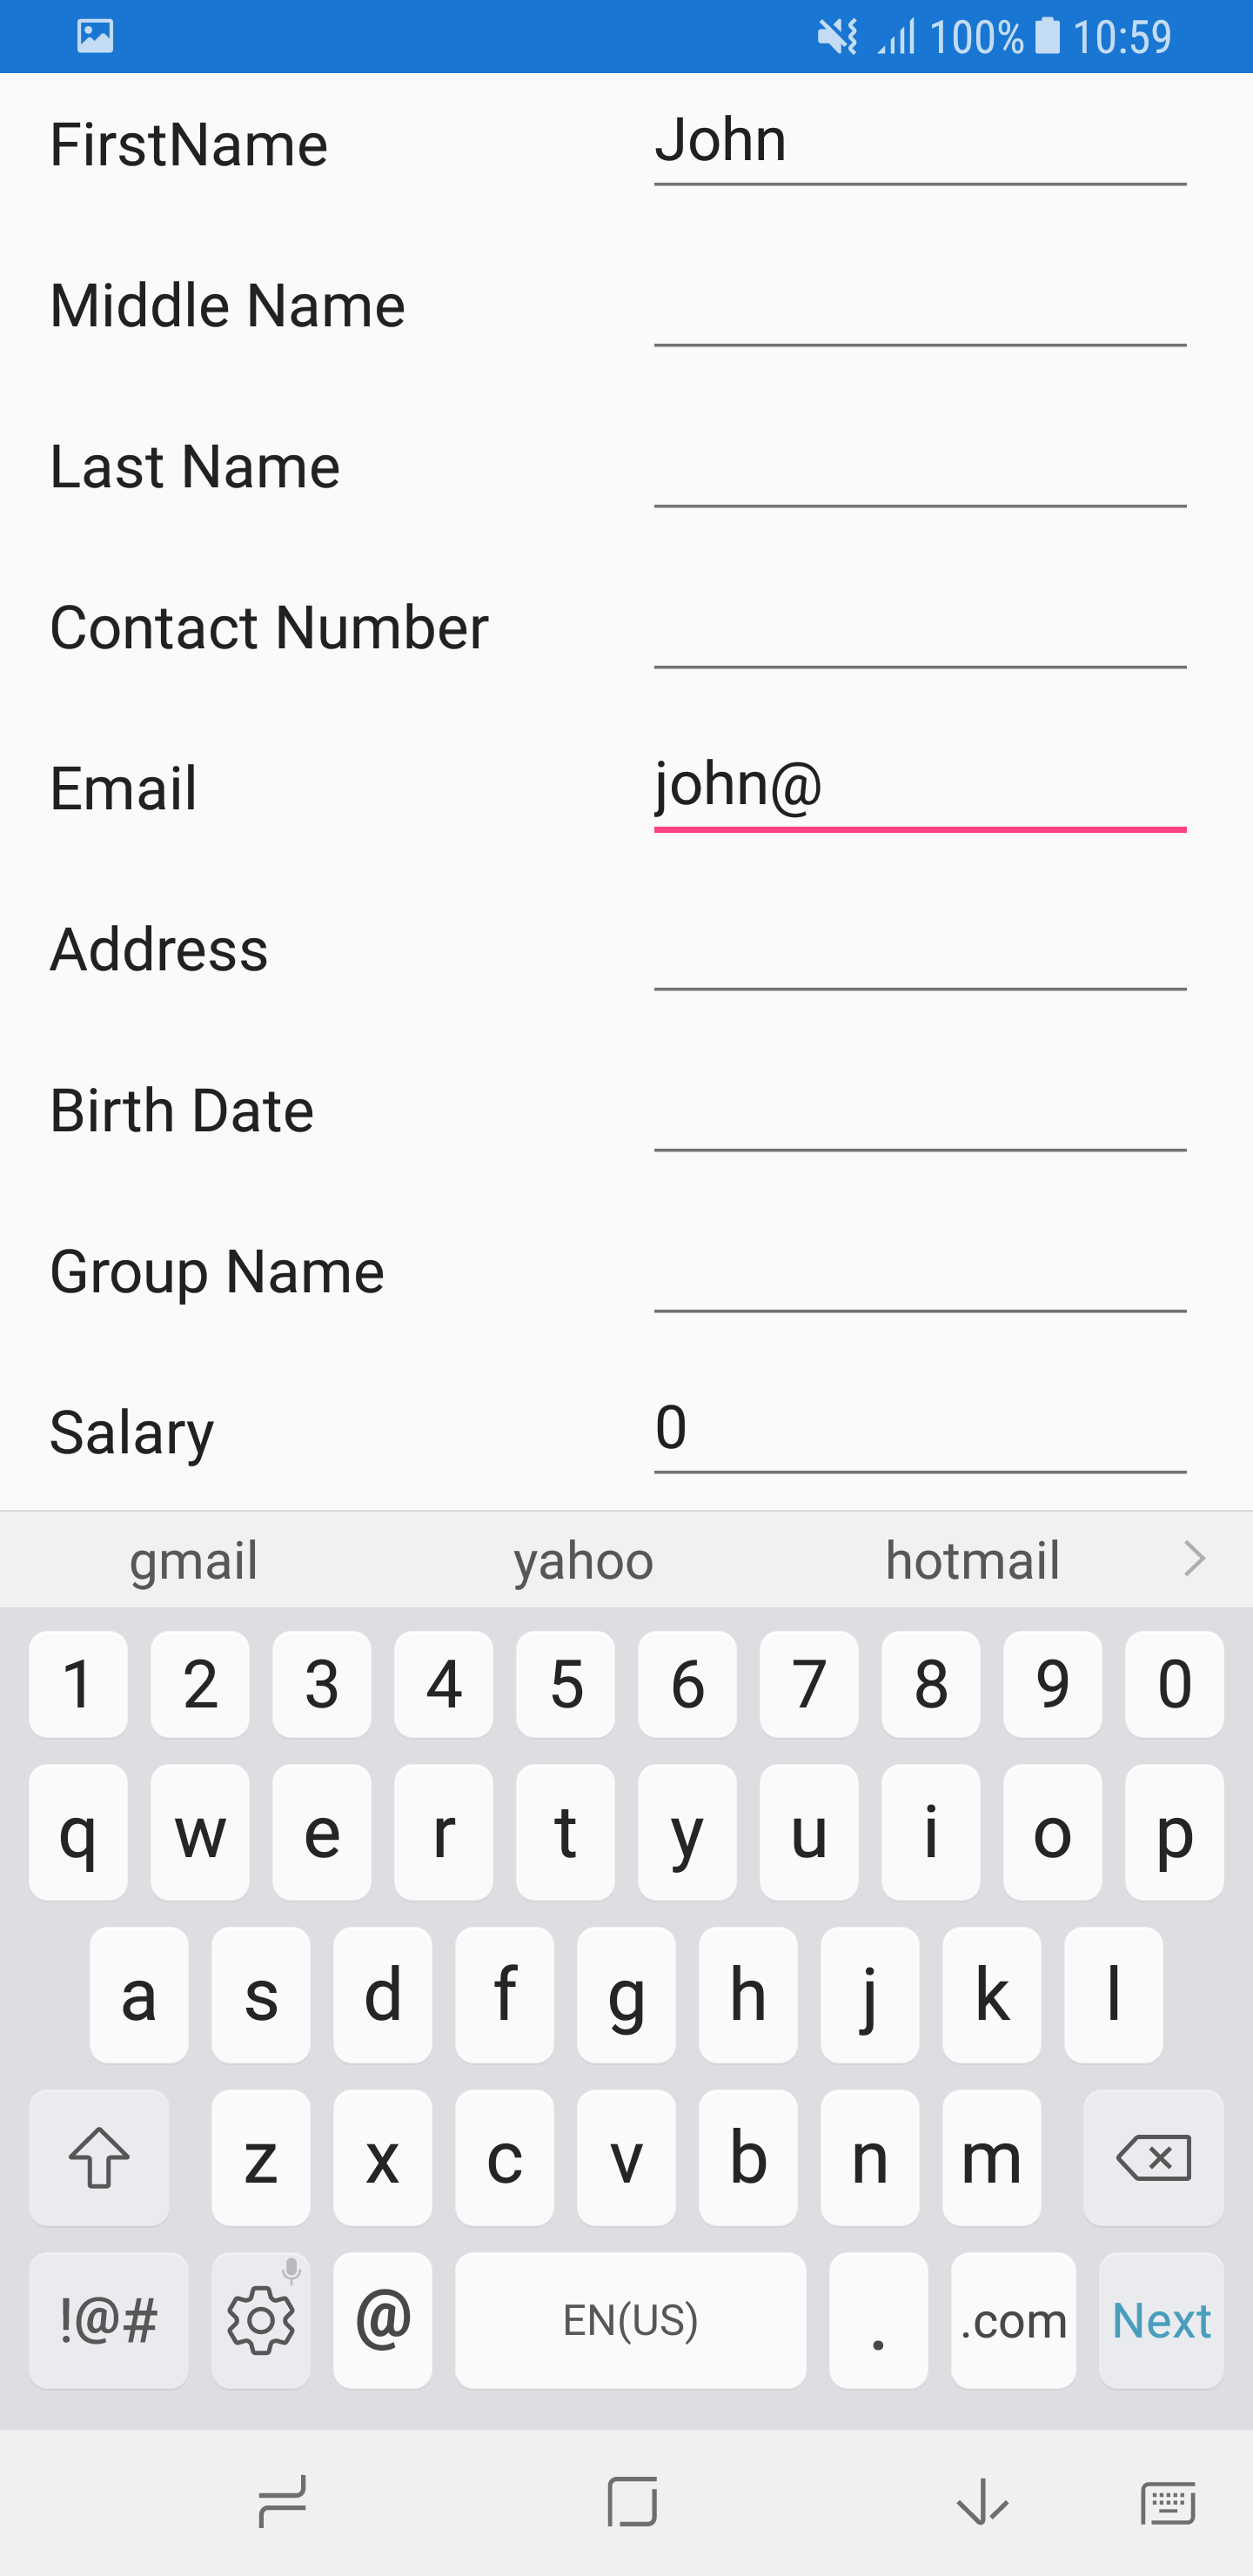 Loading Email editor to the data form item in Xamarin.Forms DataForm